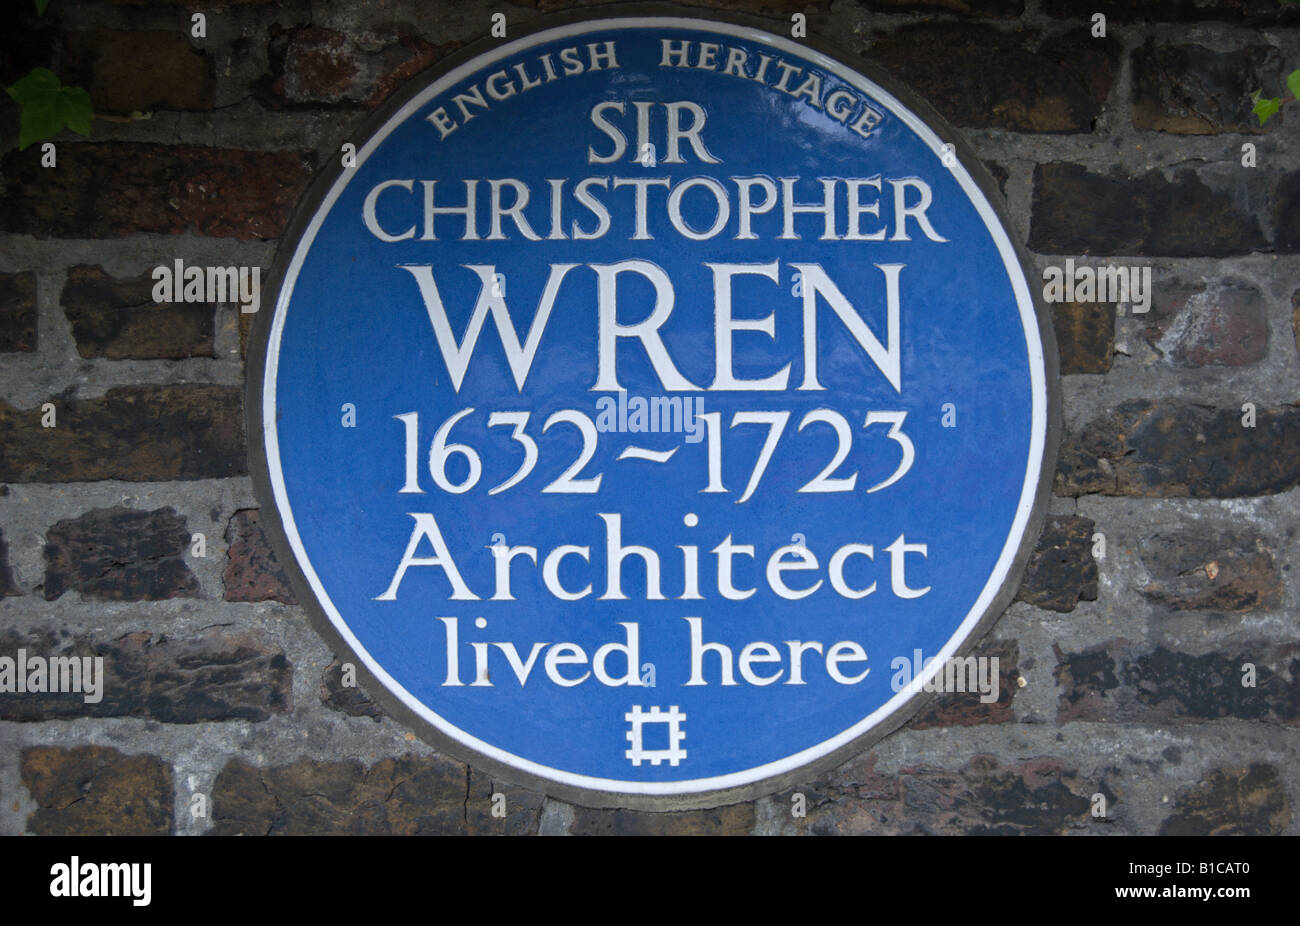 english heritage blue plaque marking a former residence near hampton court palace of architect sir christopher wren Stock Photo